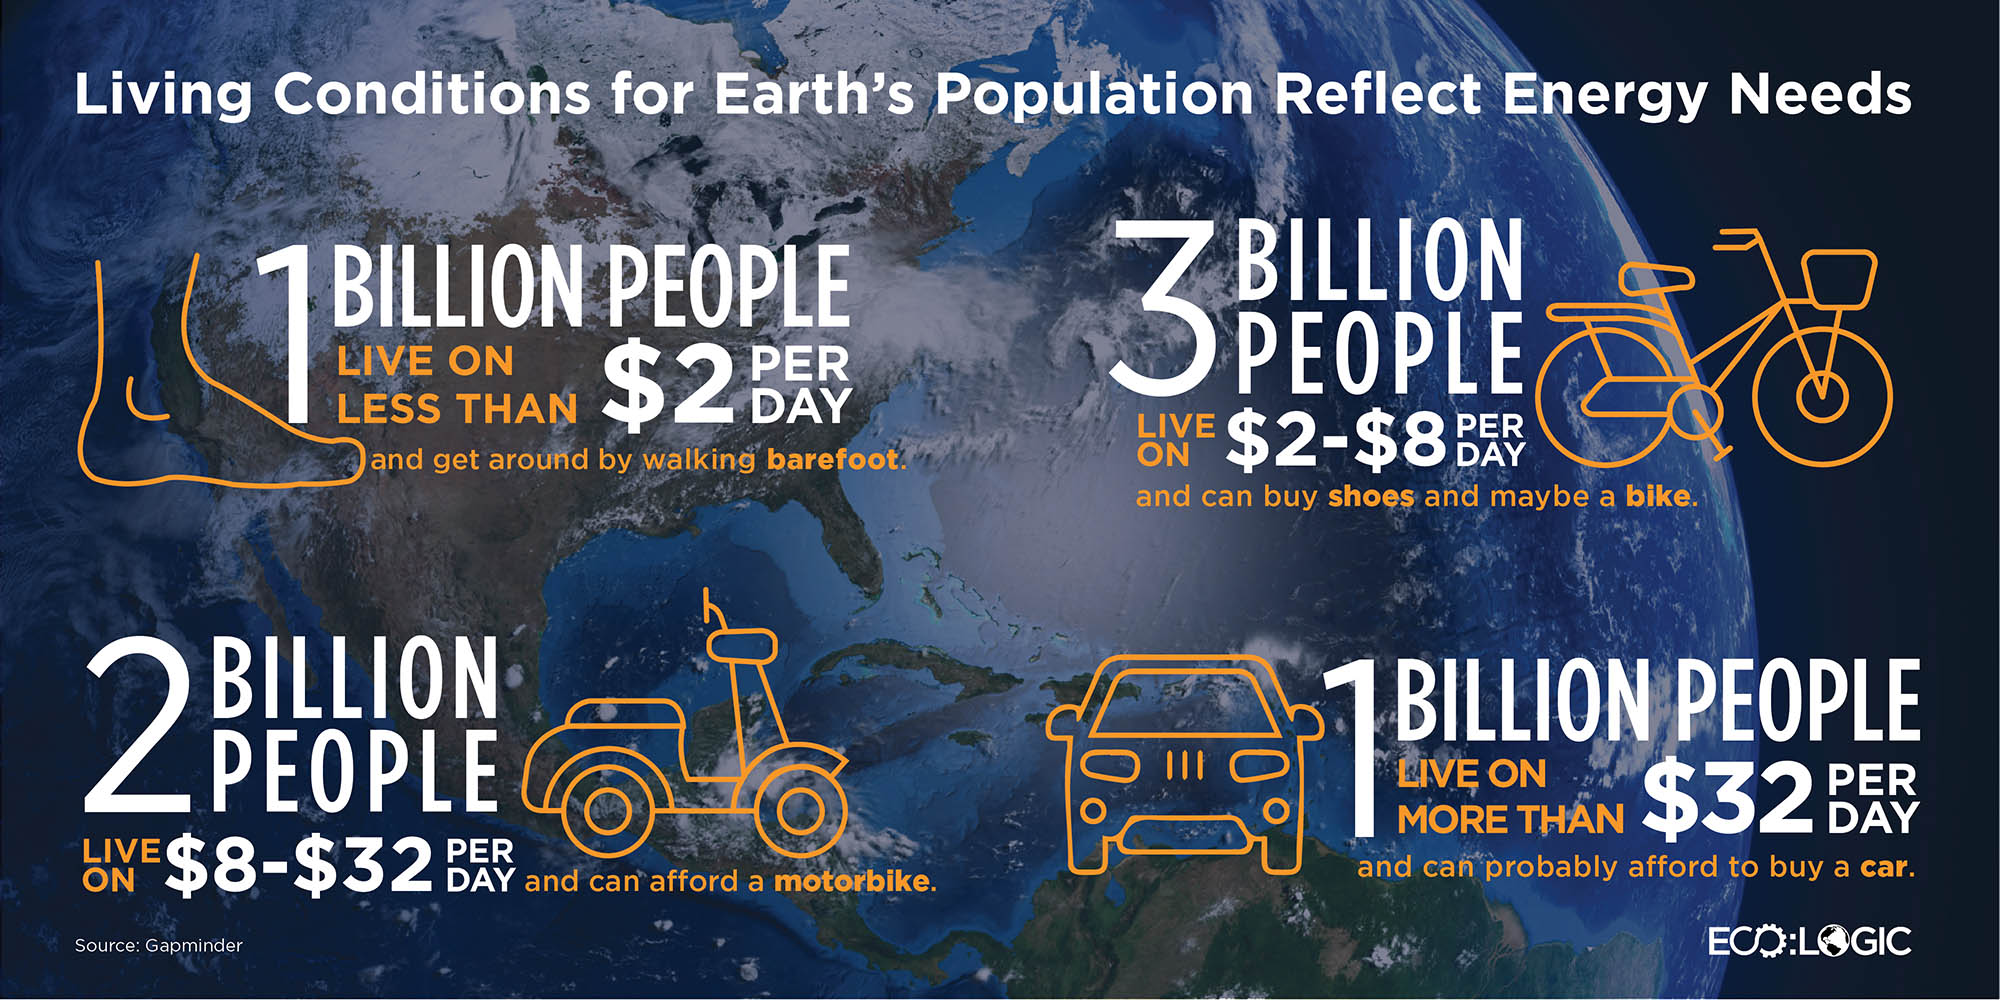 Living Conditions for Earth's Population Reflect Energy Needs